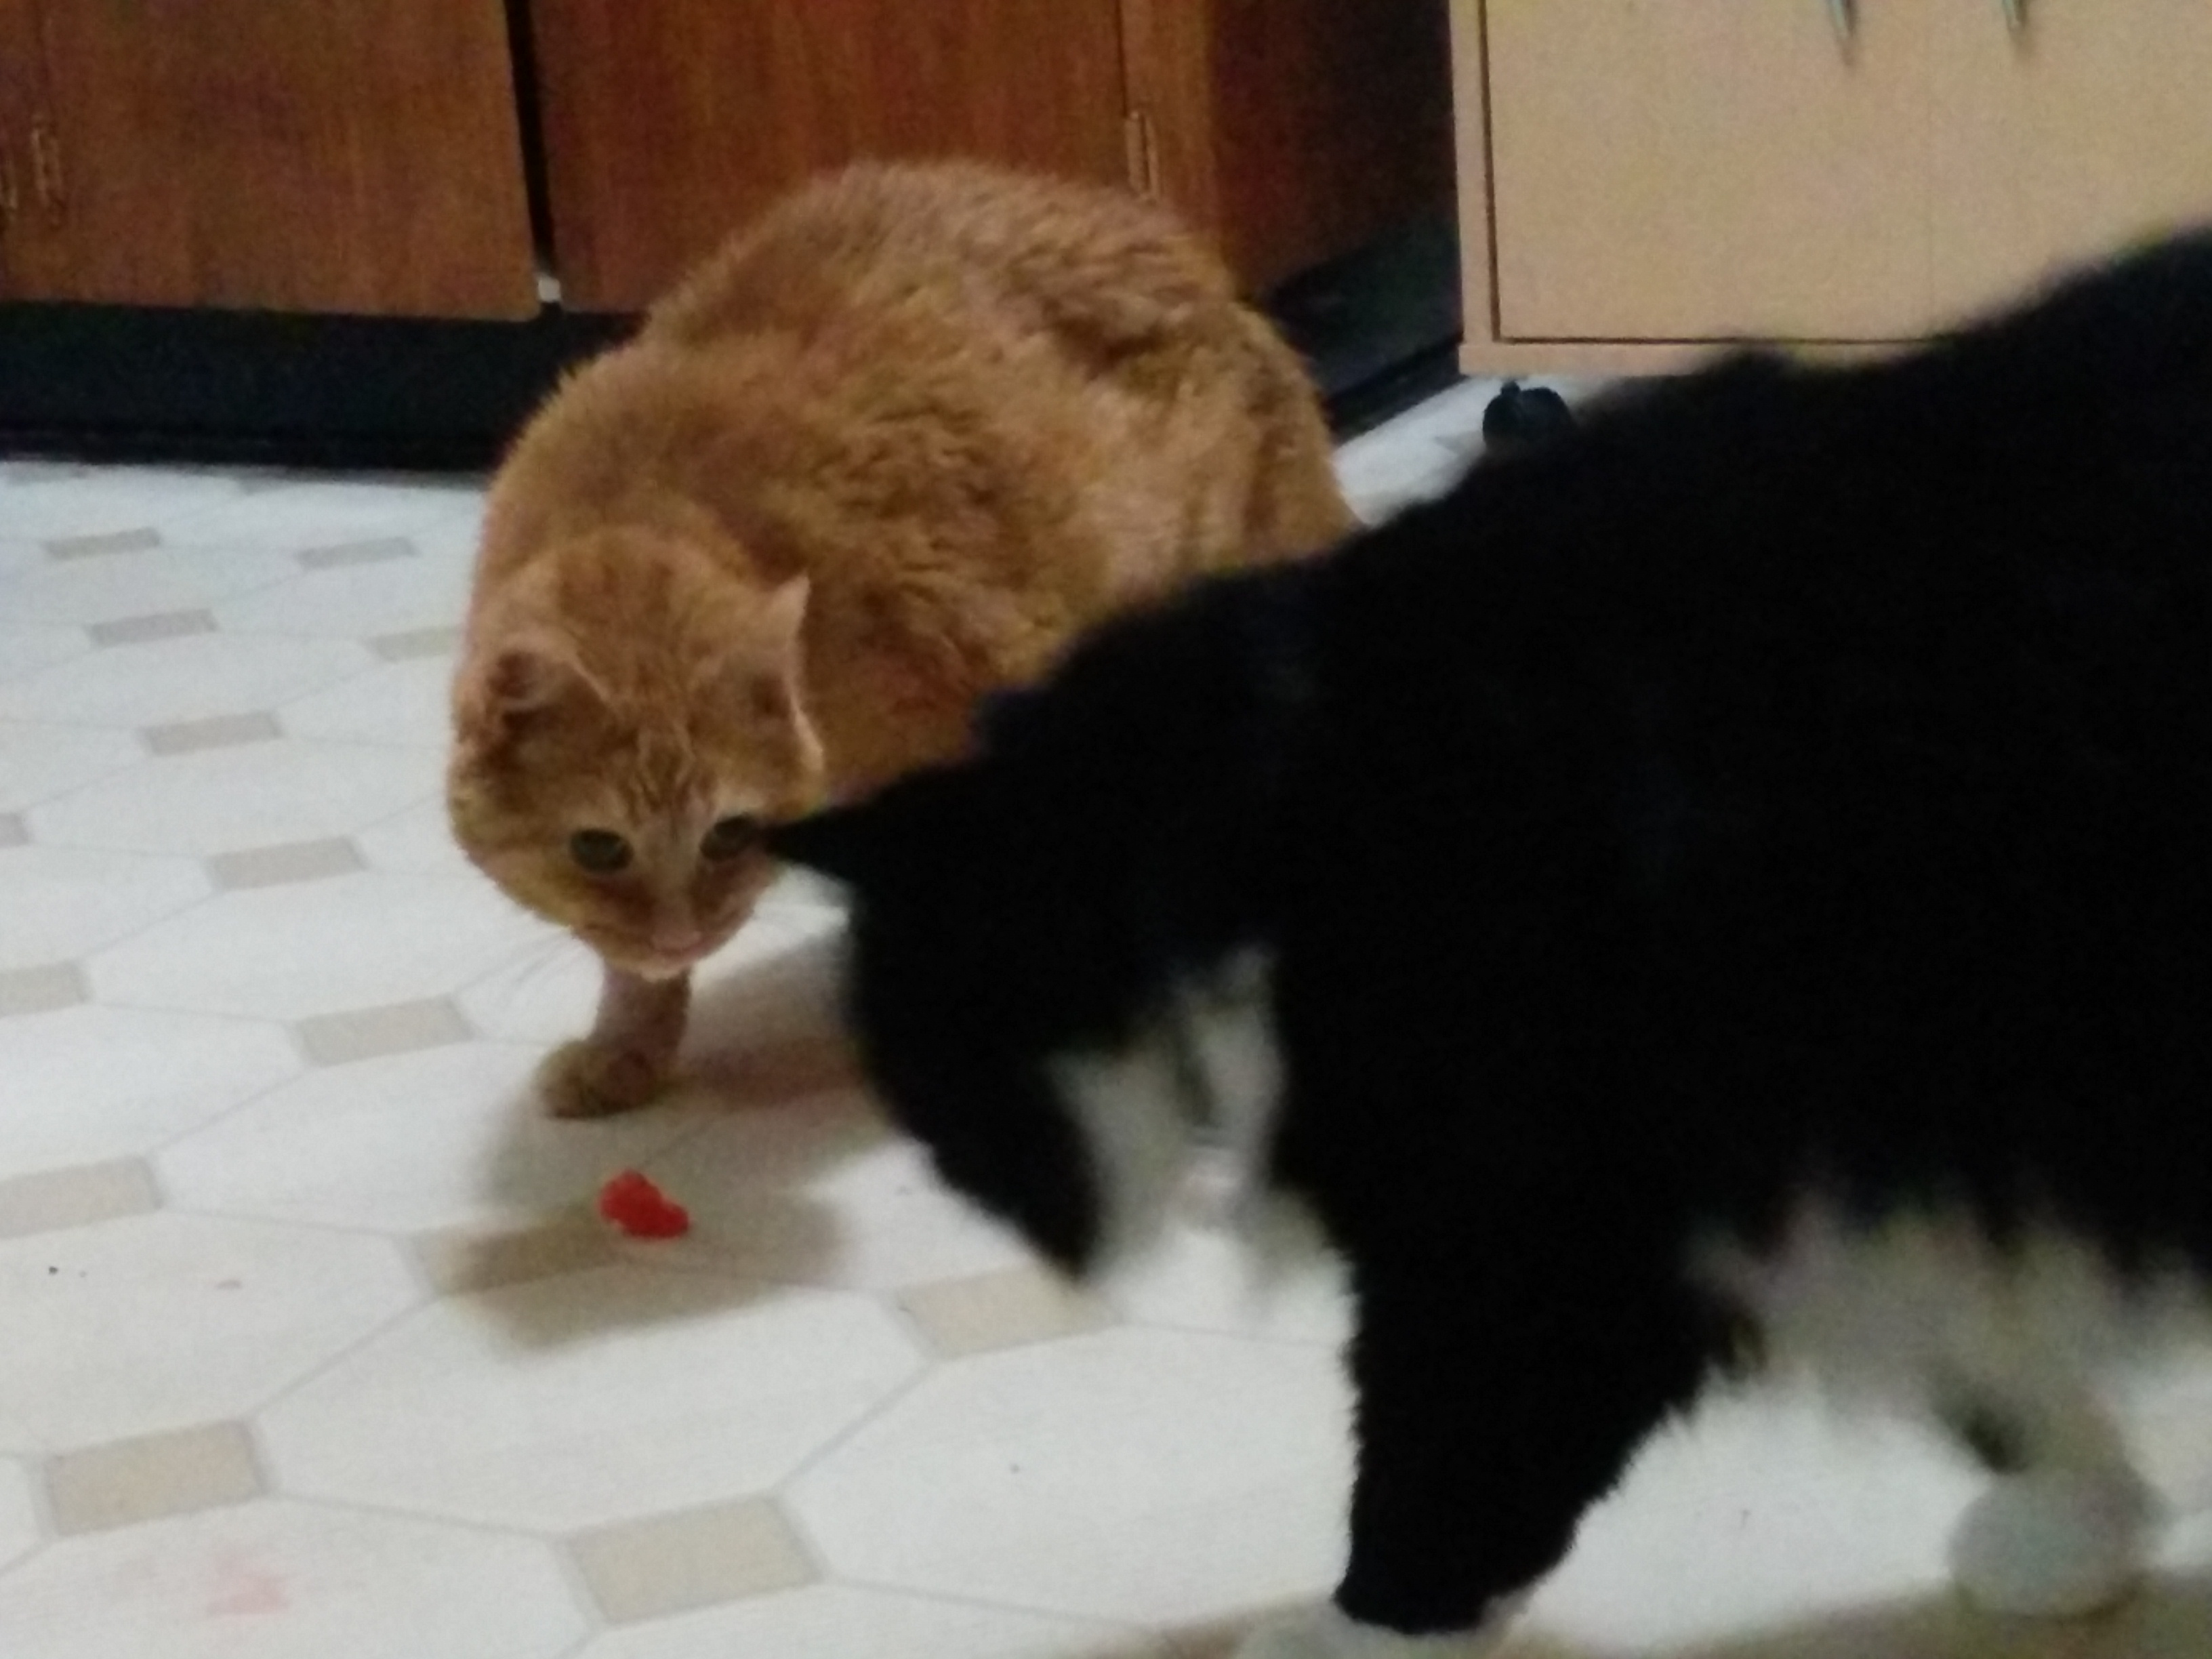 Jack with a pink food treat on the ground in front of him, and Nikita looking to try to snag it.